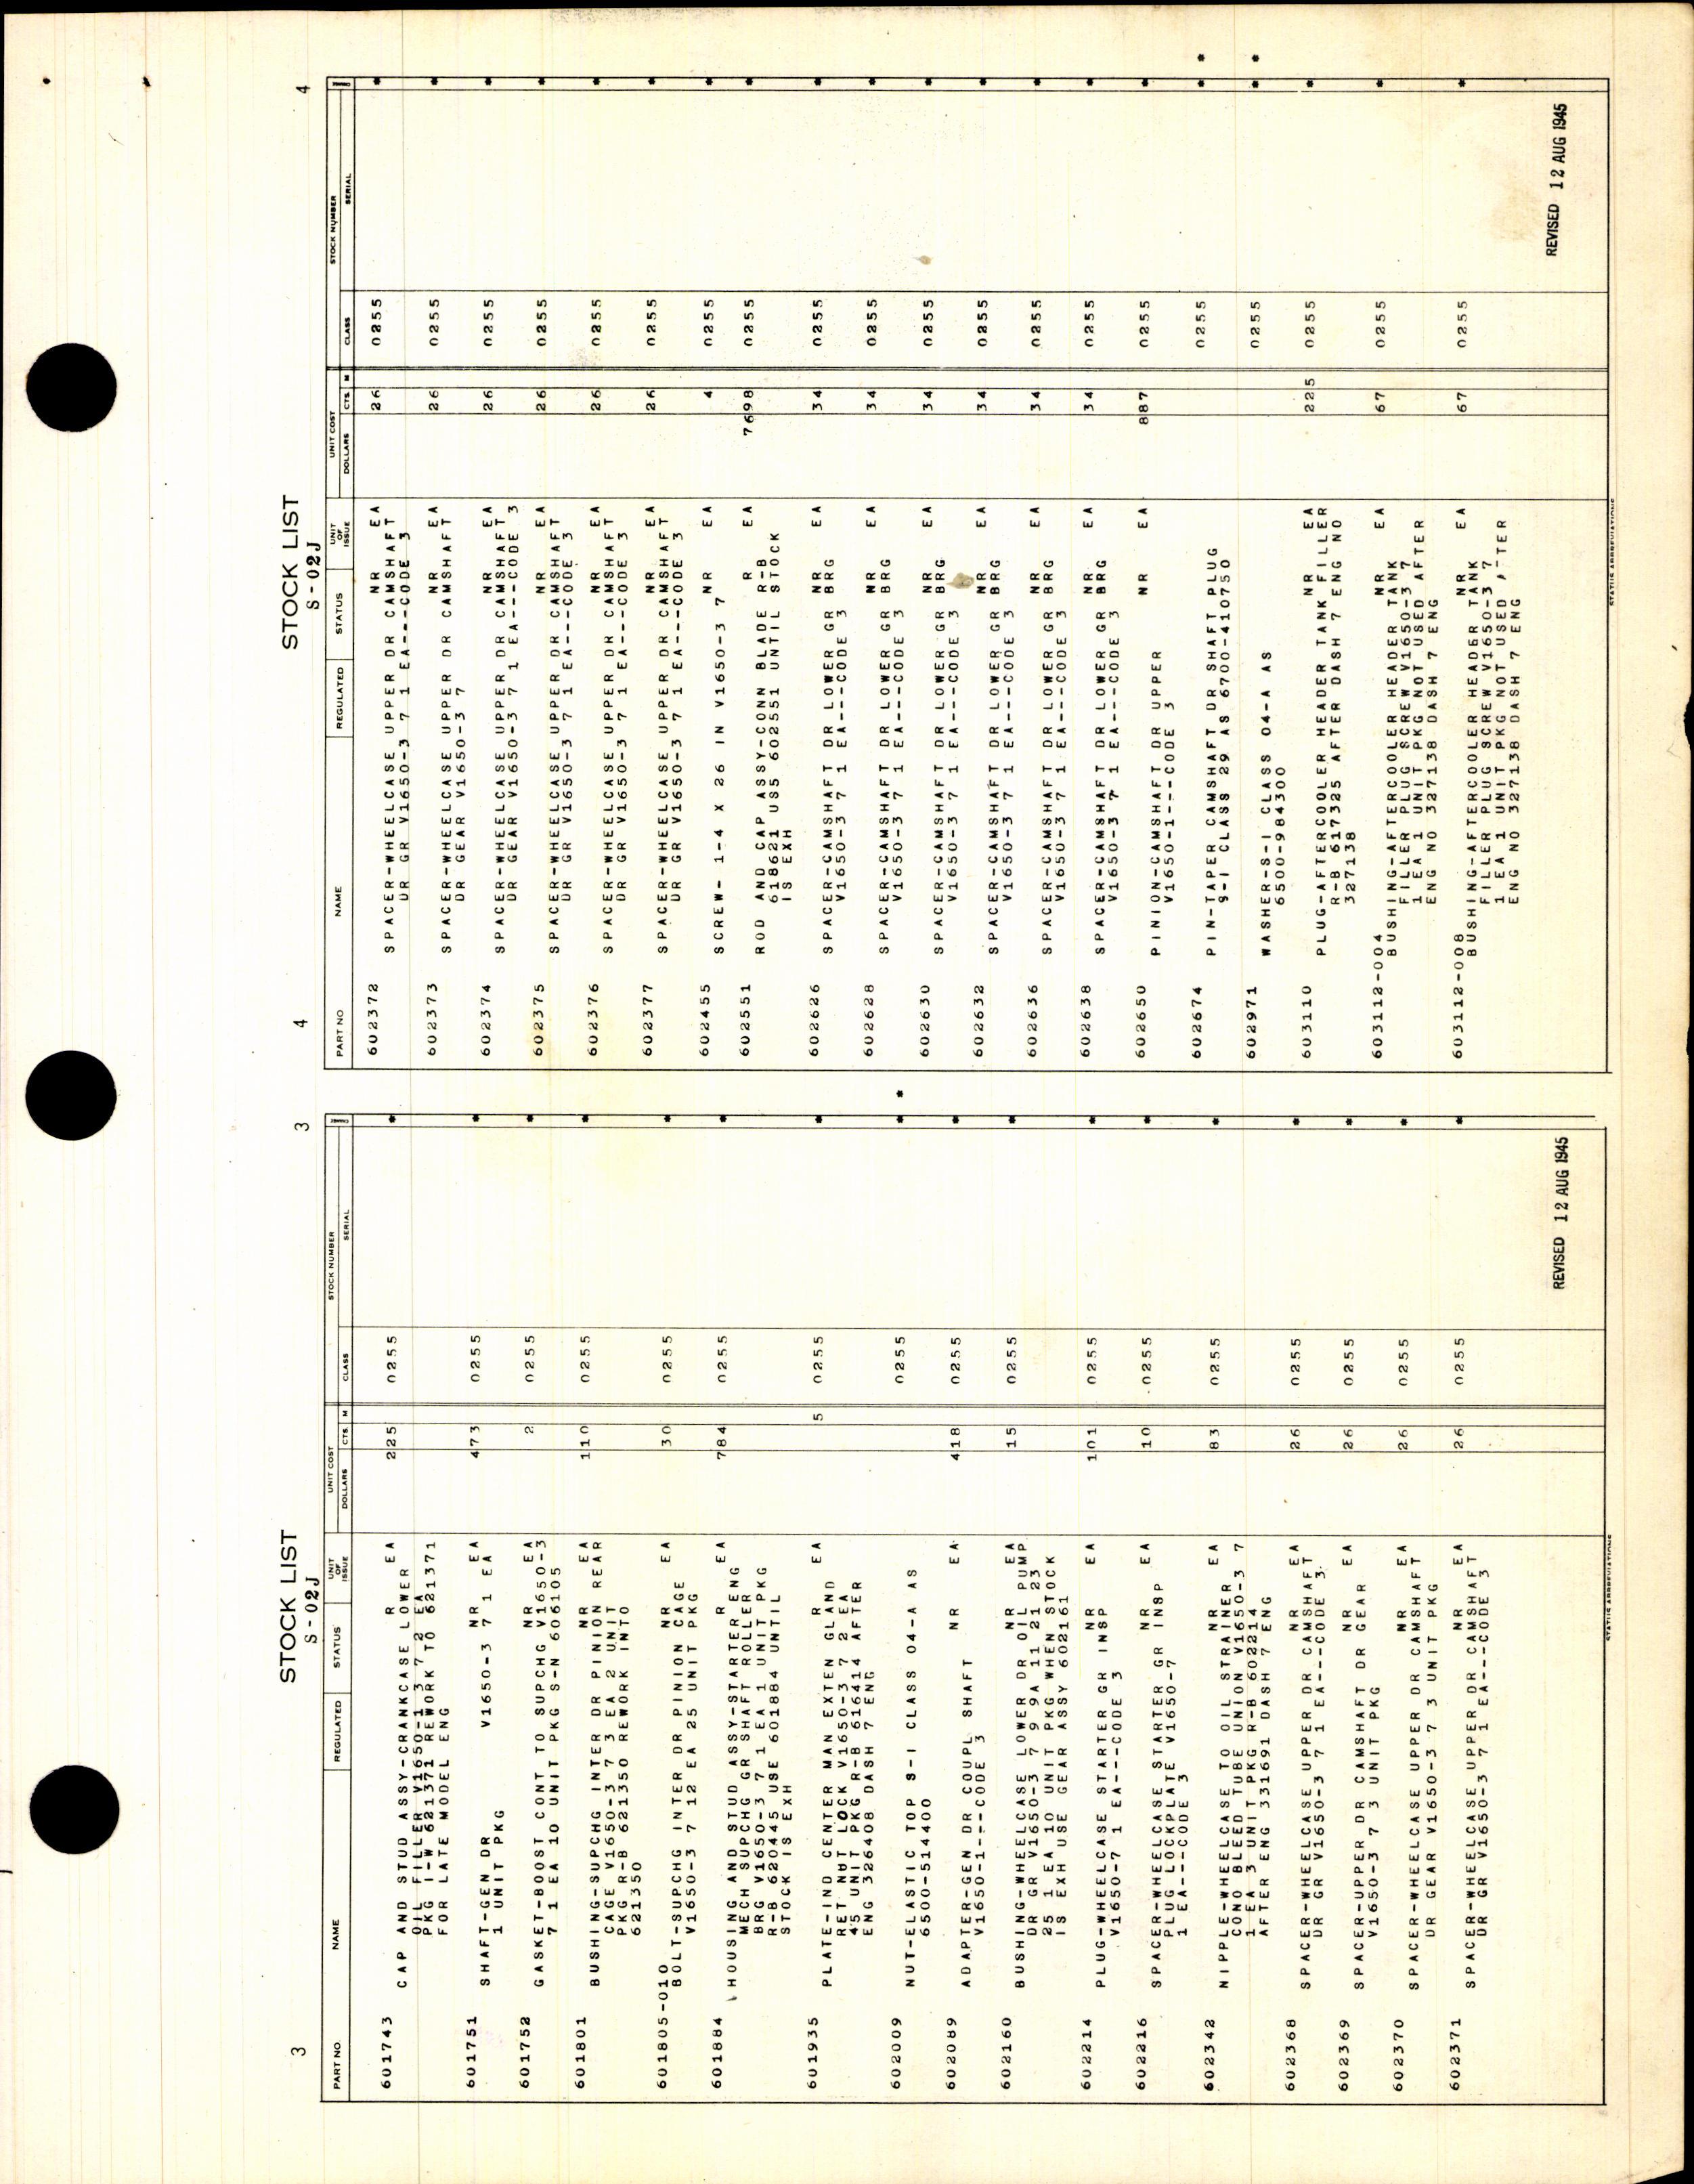 Sample page 5 from AirCorps Library document: Stock List Parts for Rolls-Royce Engines